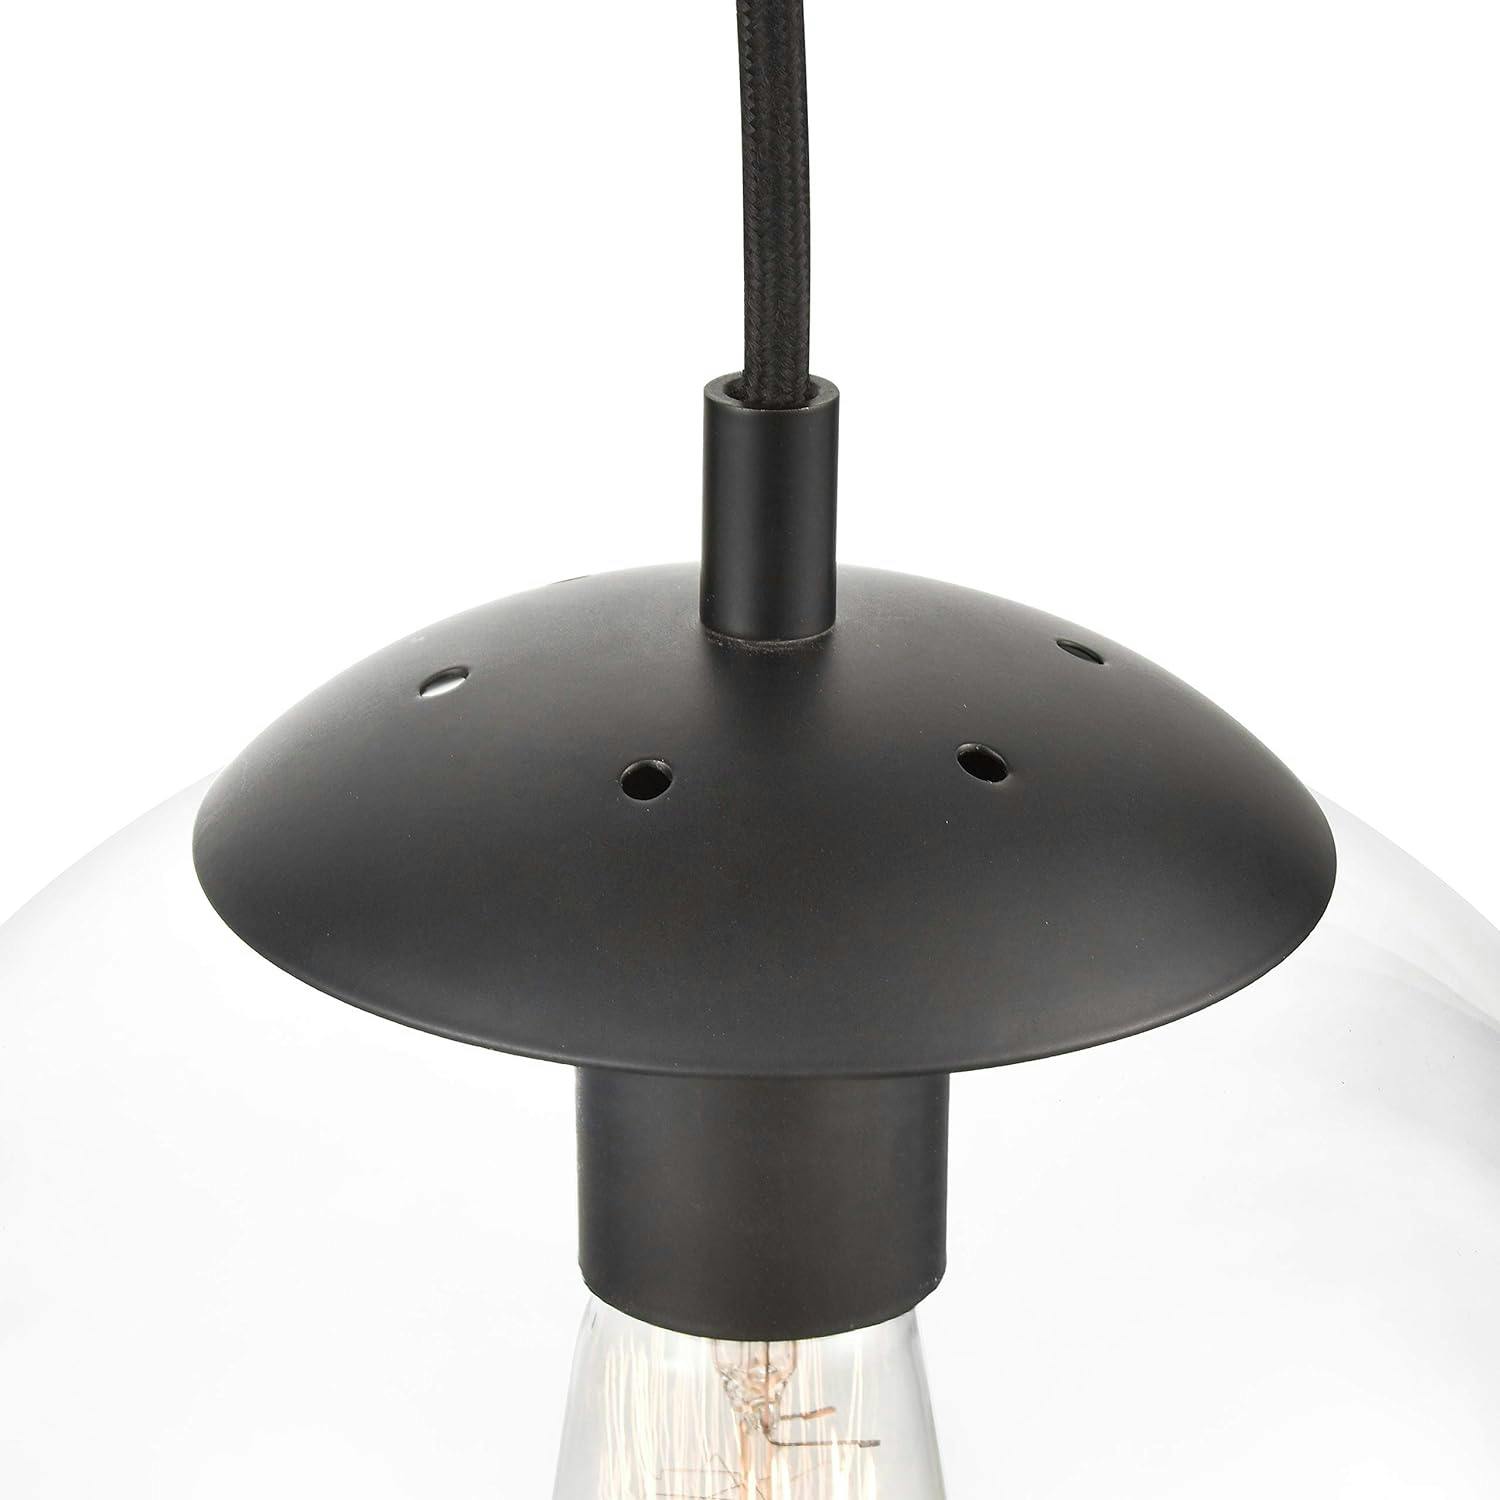 Kalix 14" Black Globe Pendant Light with Wooden Accent